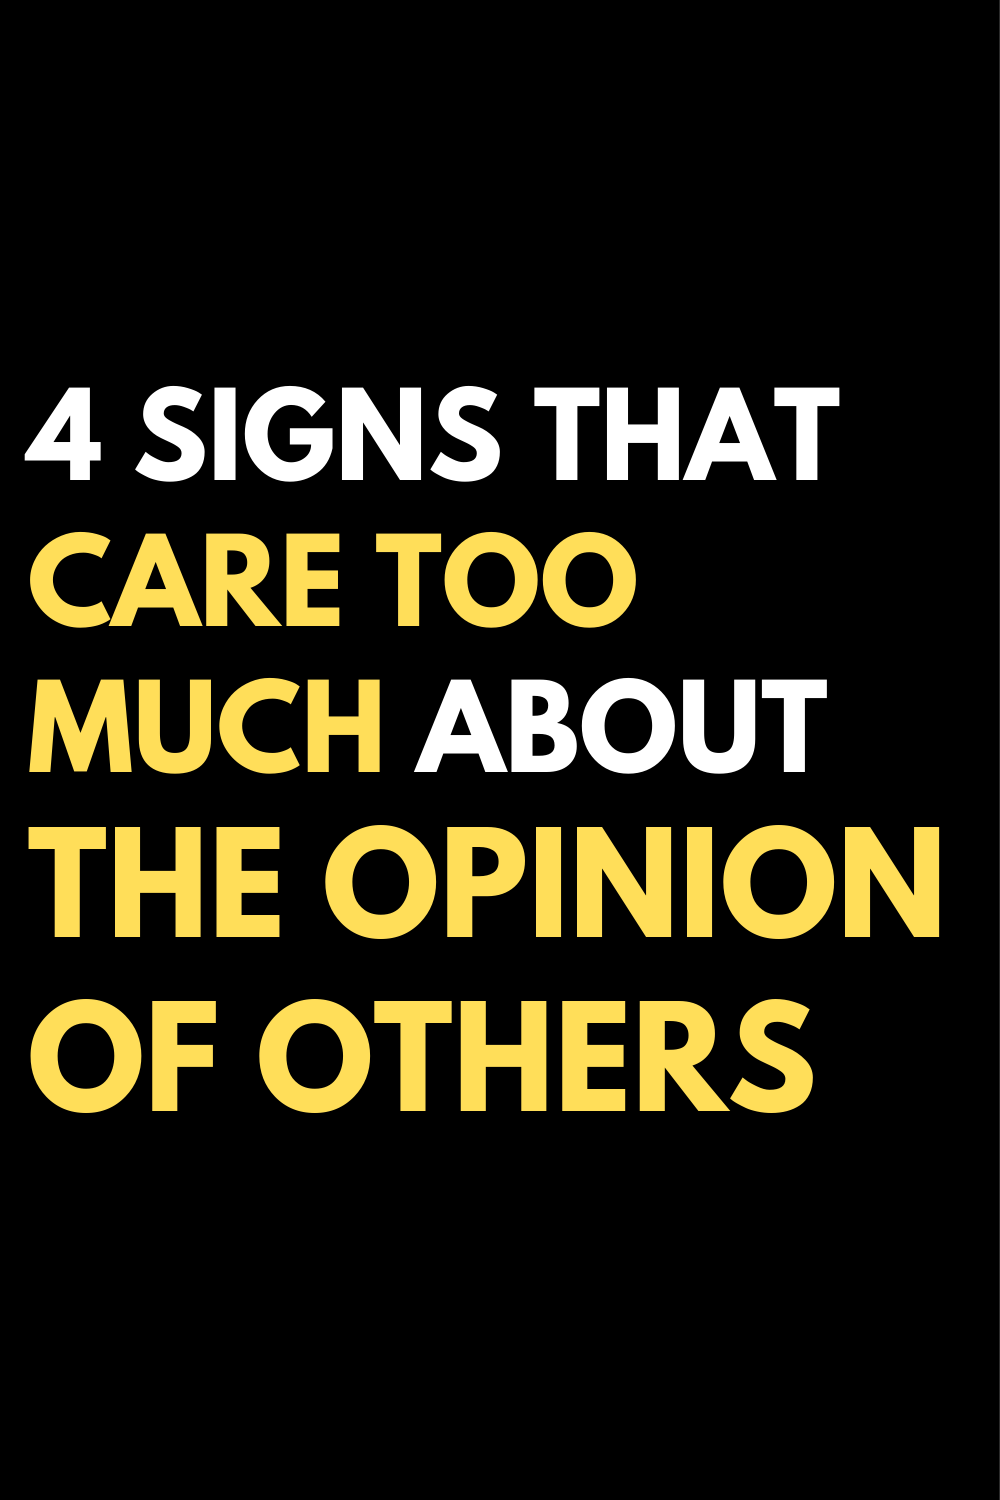 4 signs that care too much about the opinion of others